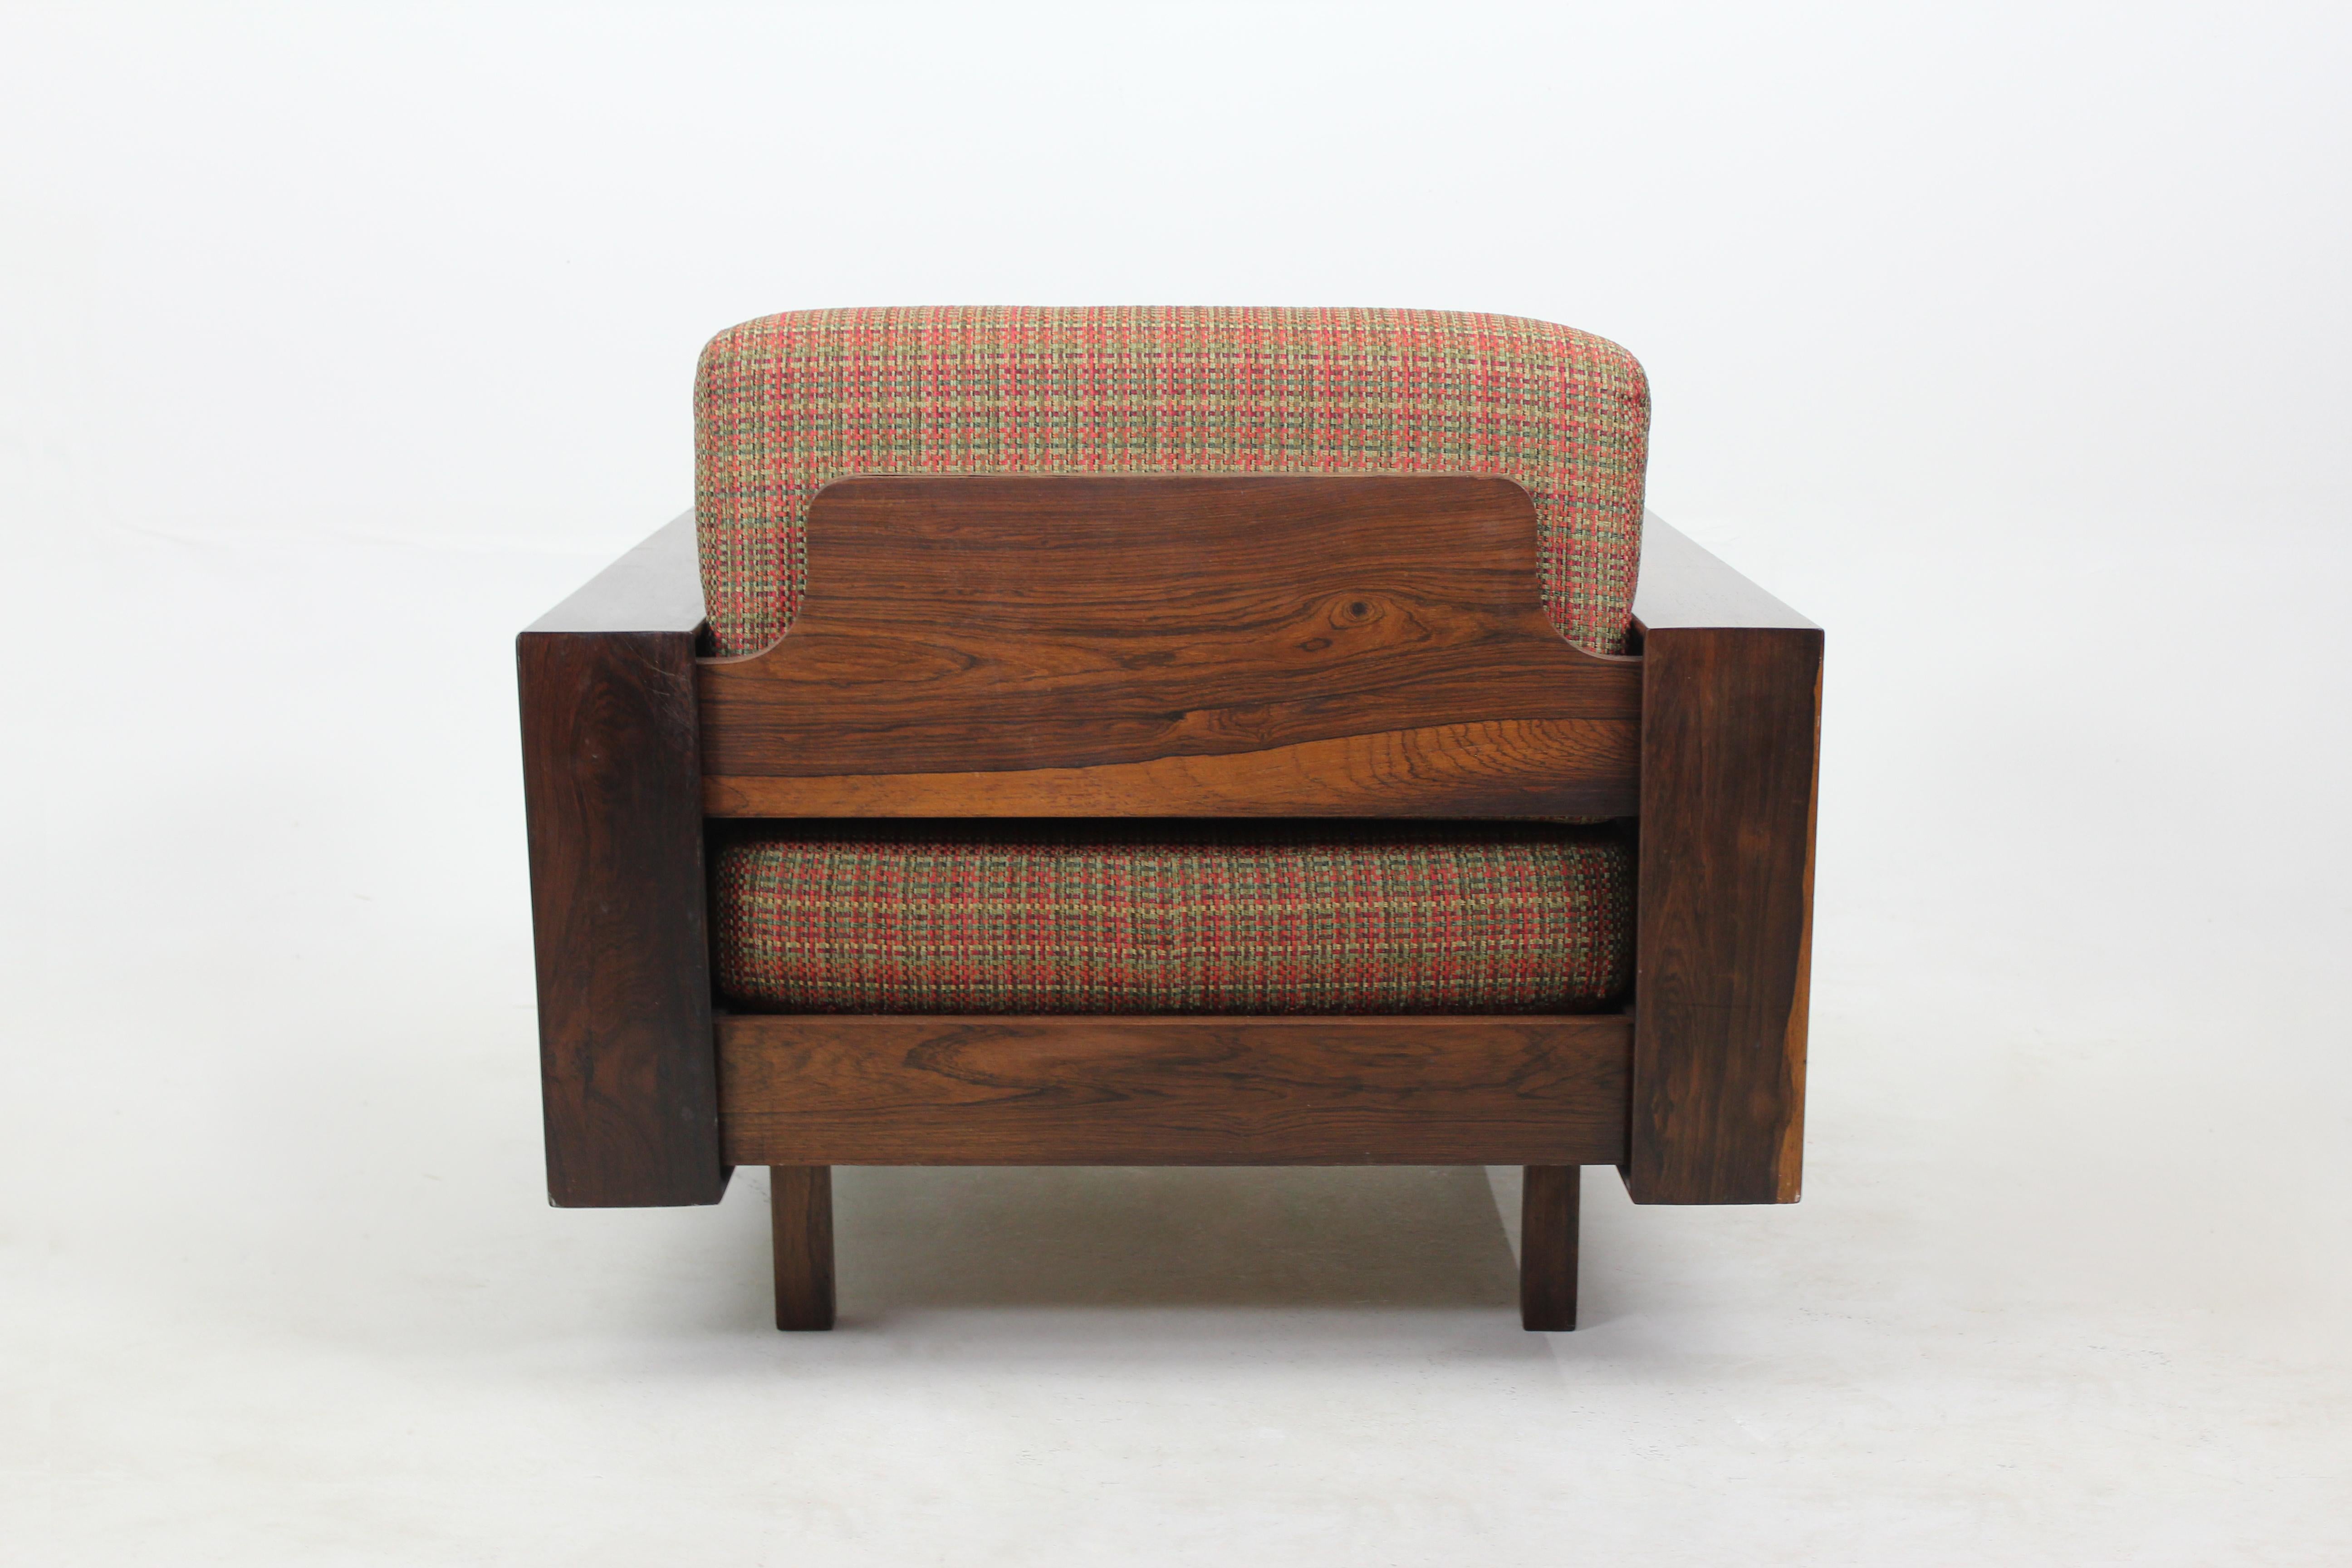 Mid-Century Modern pair of armchairs by Celina Decorações, Brazil, 1960s (Set of 2).

Created and produced in Brazil in the 1960s by the manufacturer Celina Decorações, this pair of armchairs is structured in solid wood and features comfortable